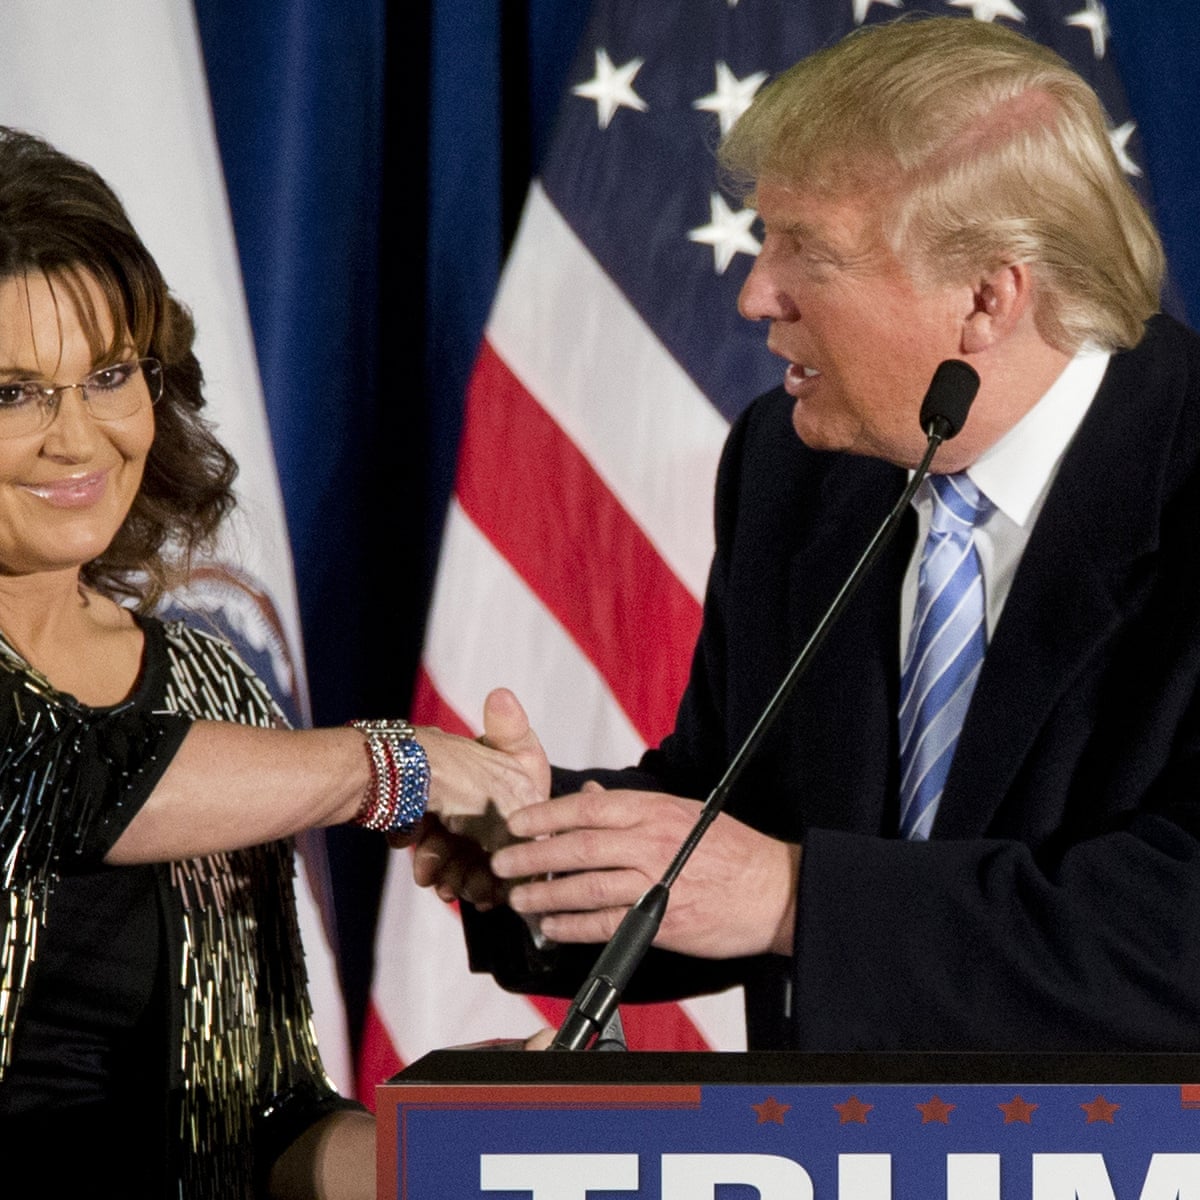 Trump and Palin may be funny. But they are no joke Jonathan Freedland | The Guardian